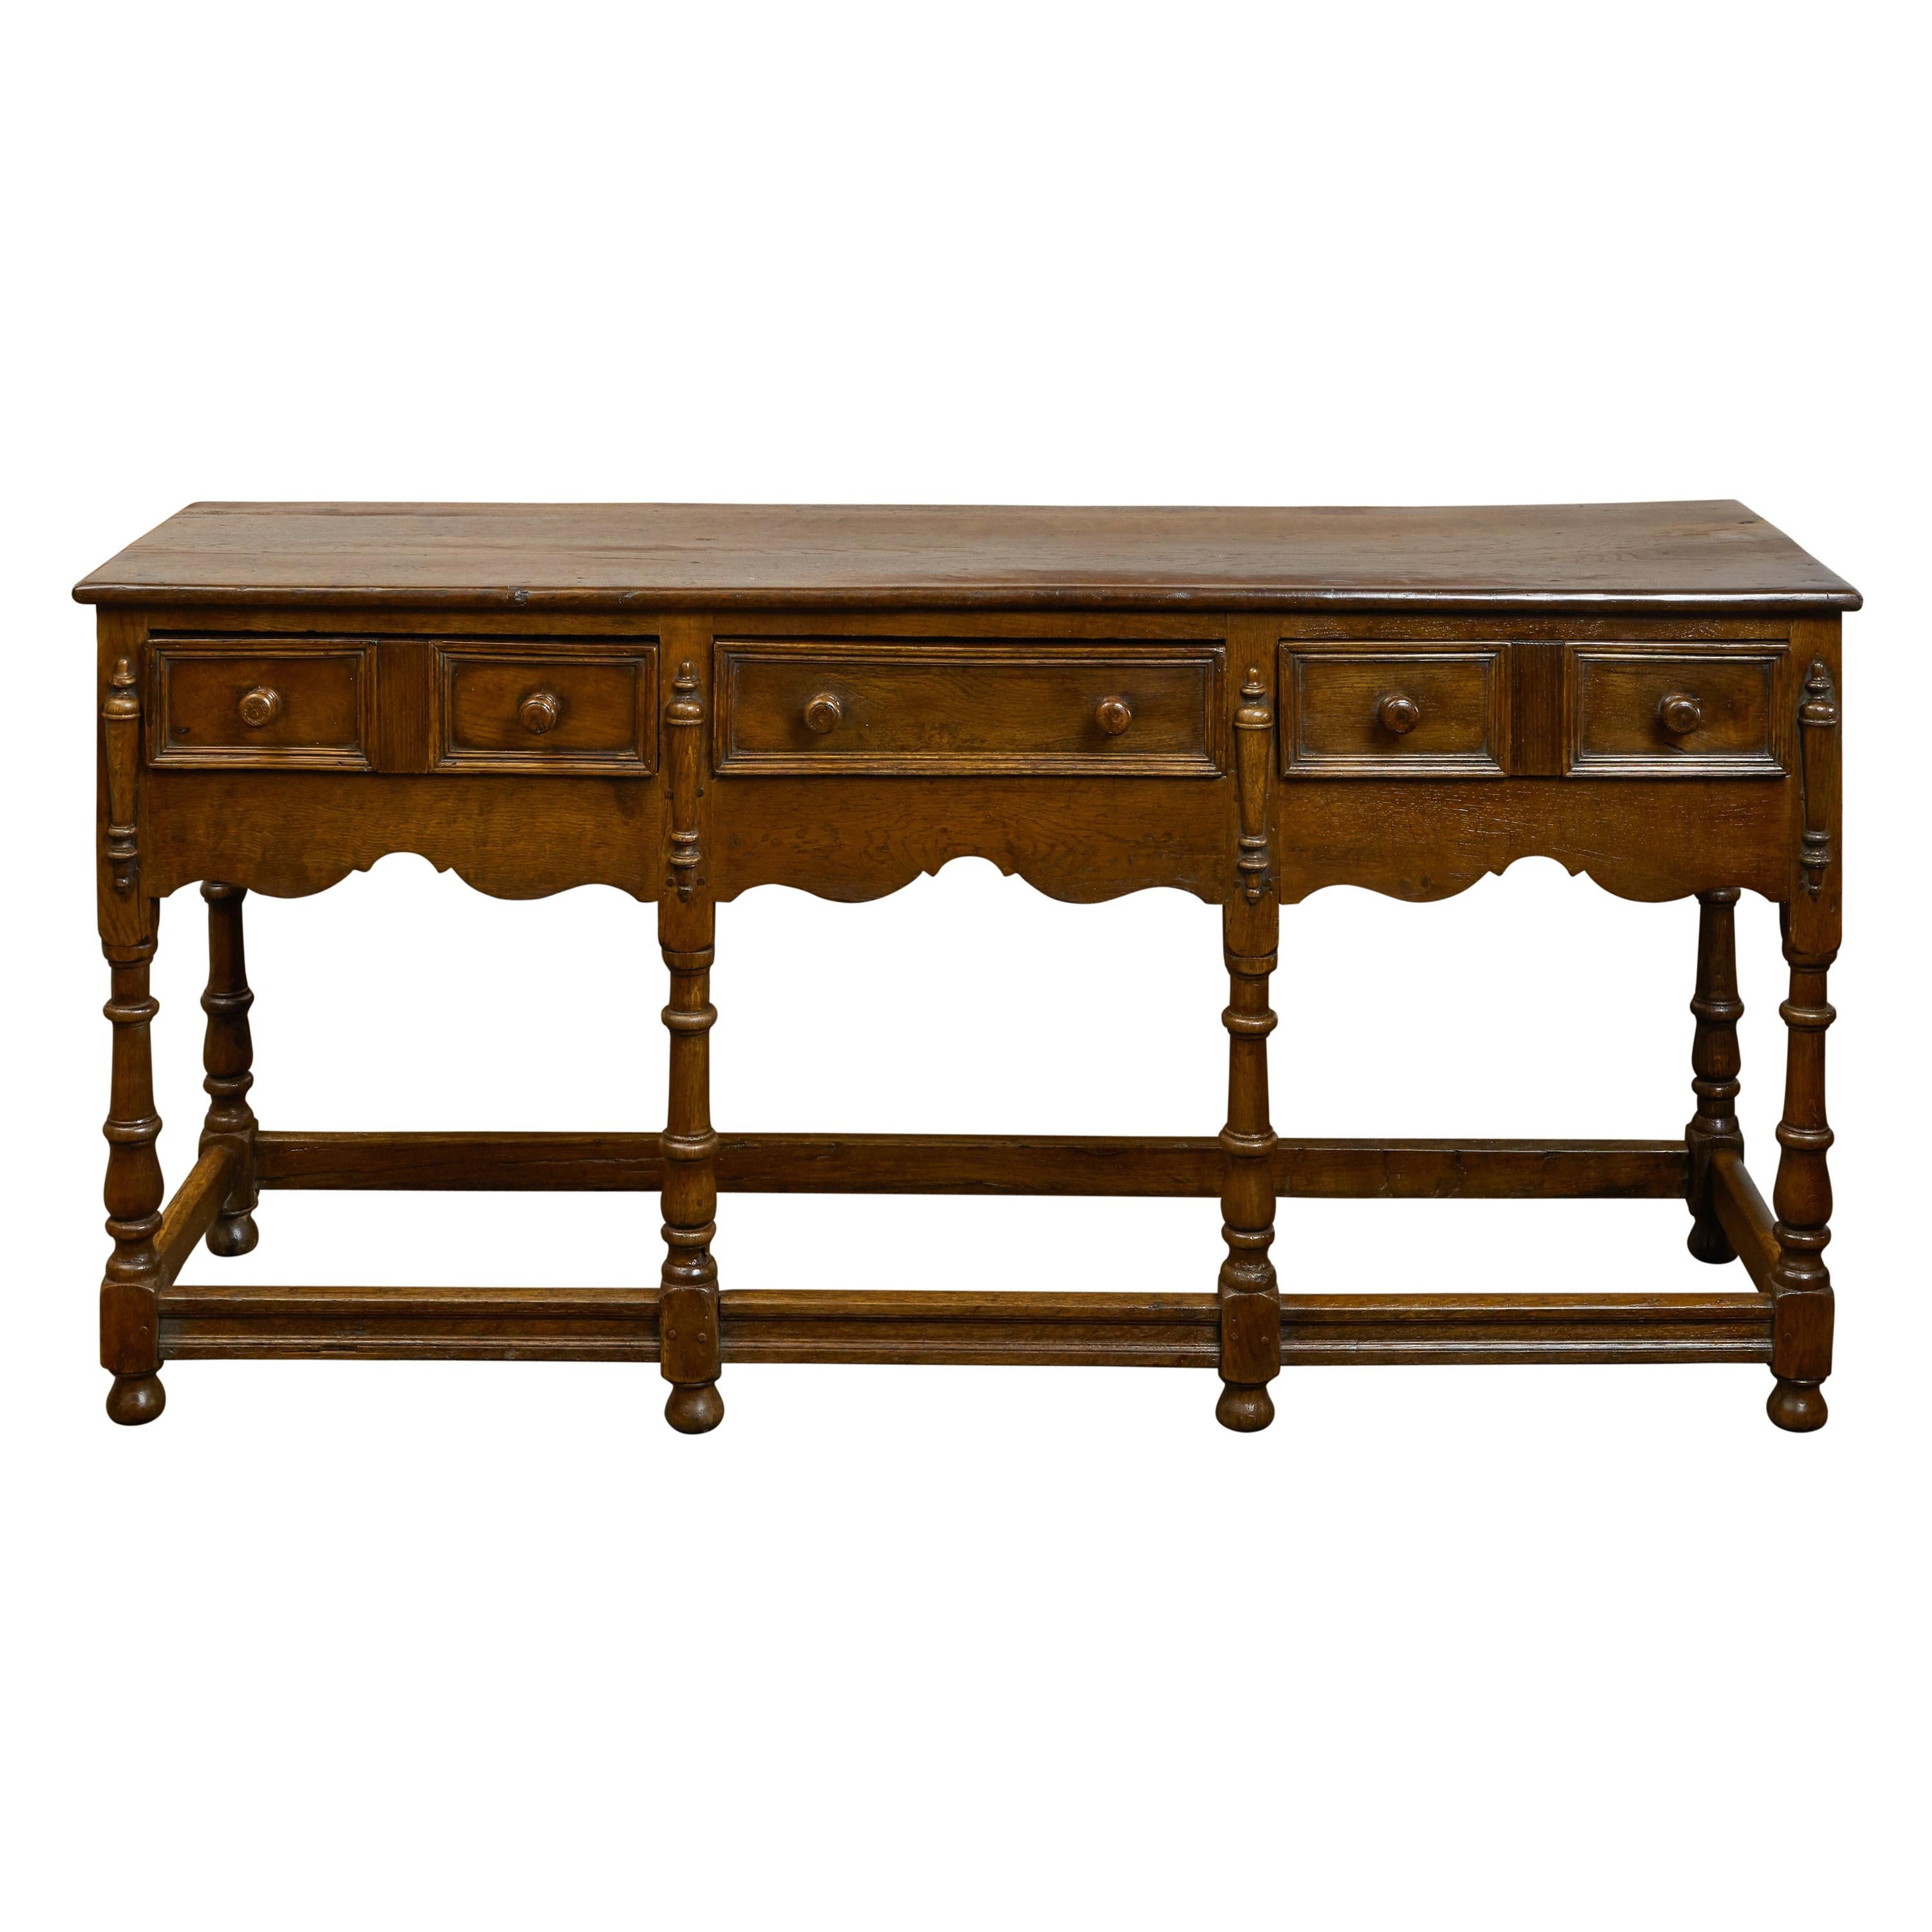 English 1860s Oak Dresser Base with Drawers, Scalloped Apron and Turned Legs For Sale